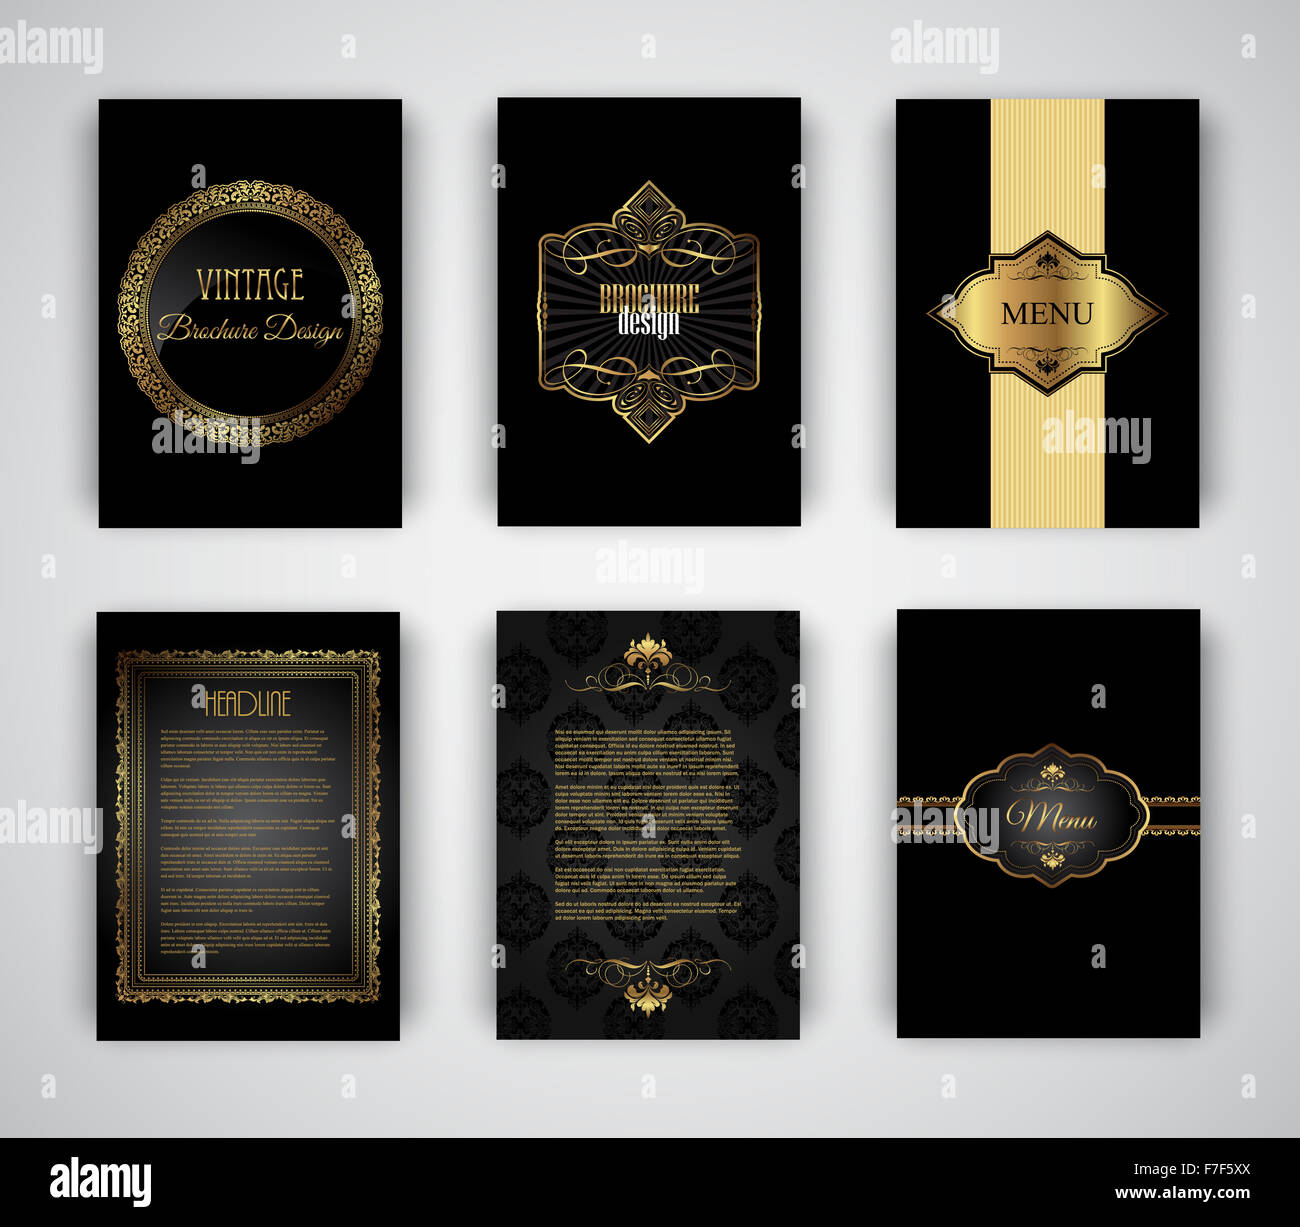 Collection of gold and black brochure and menu templates Stock Photo